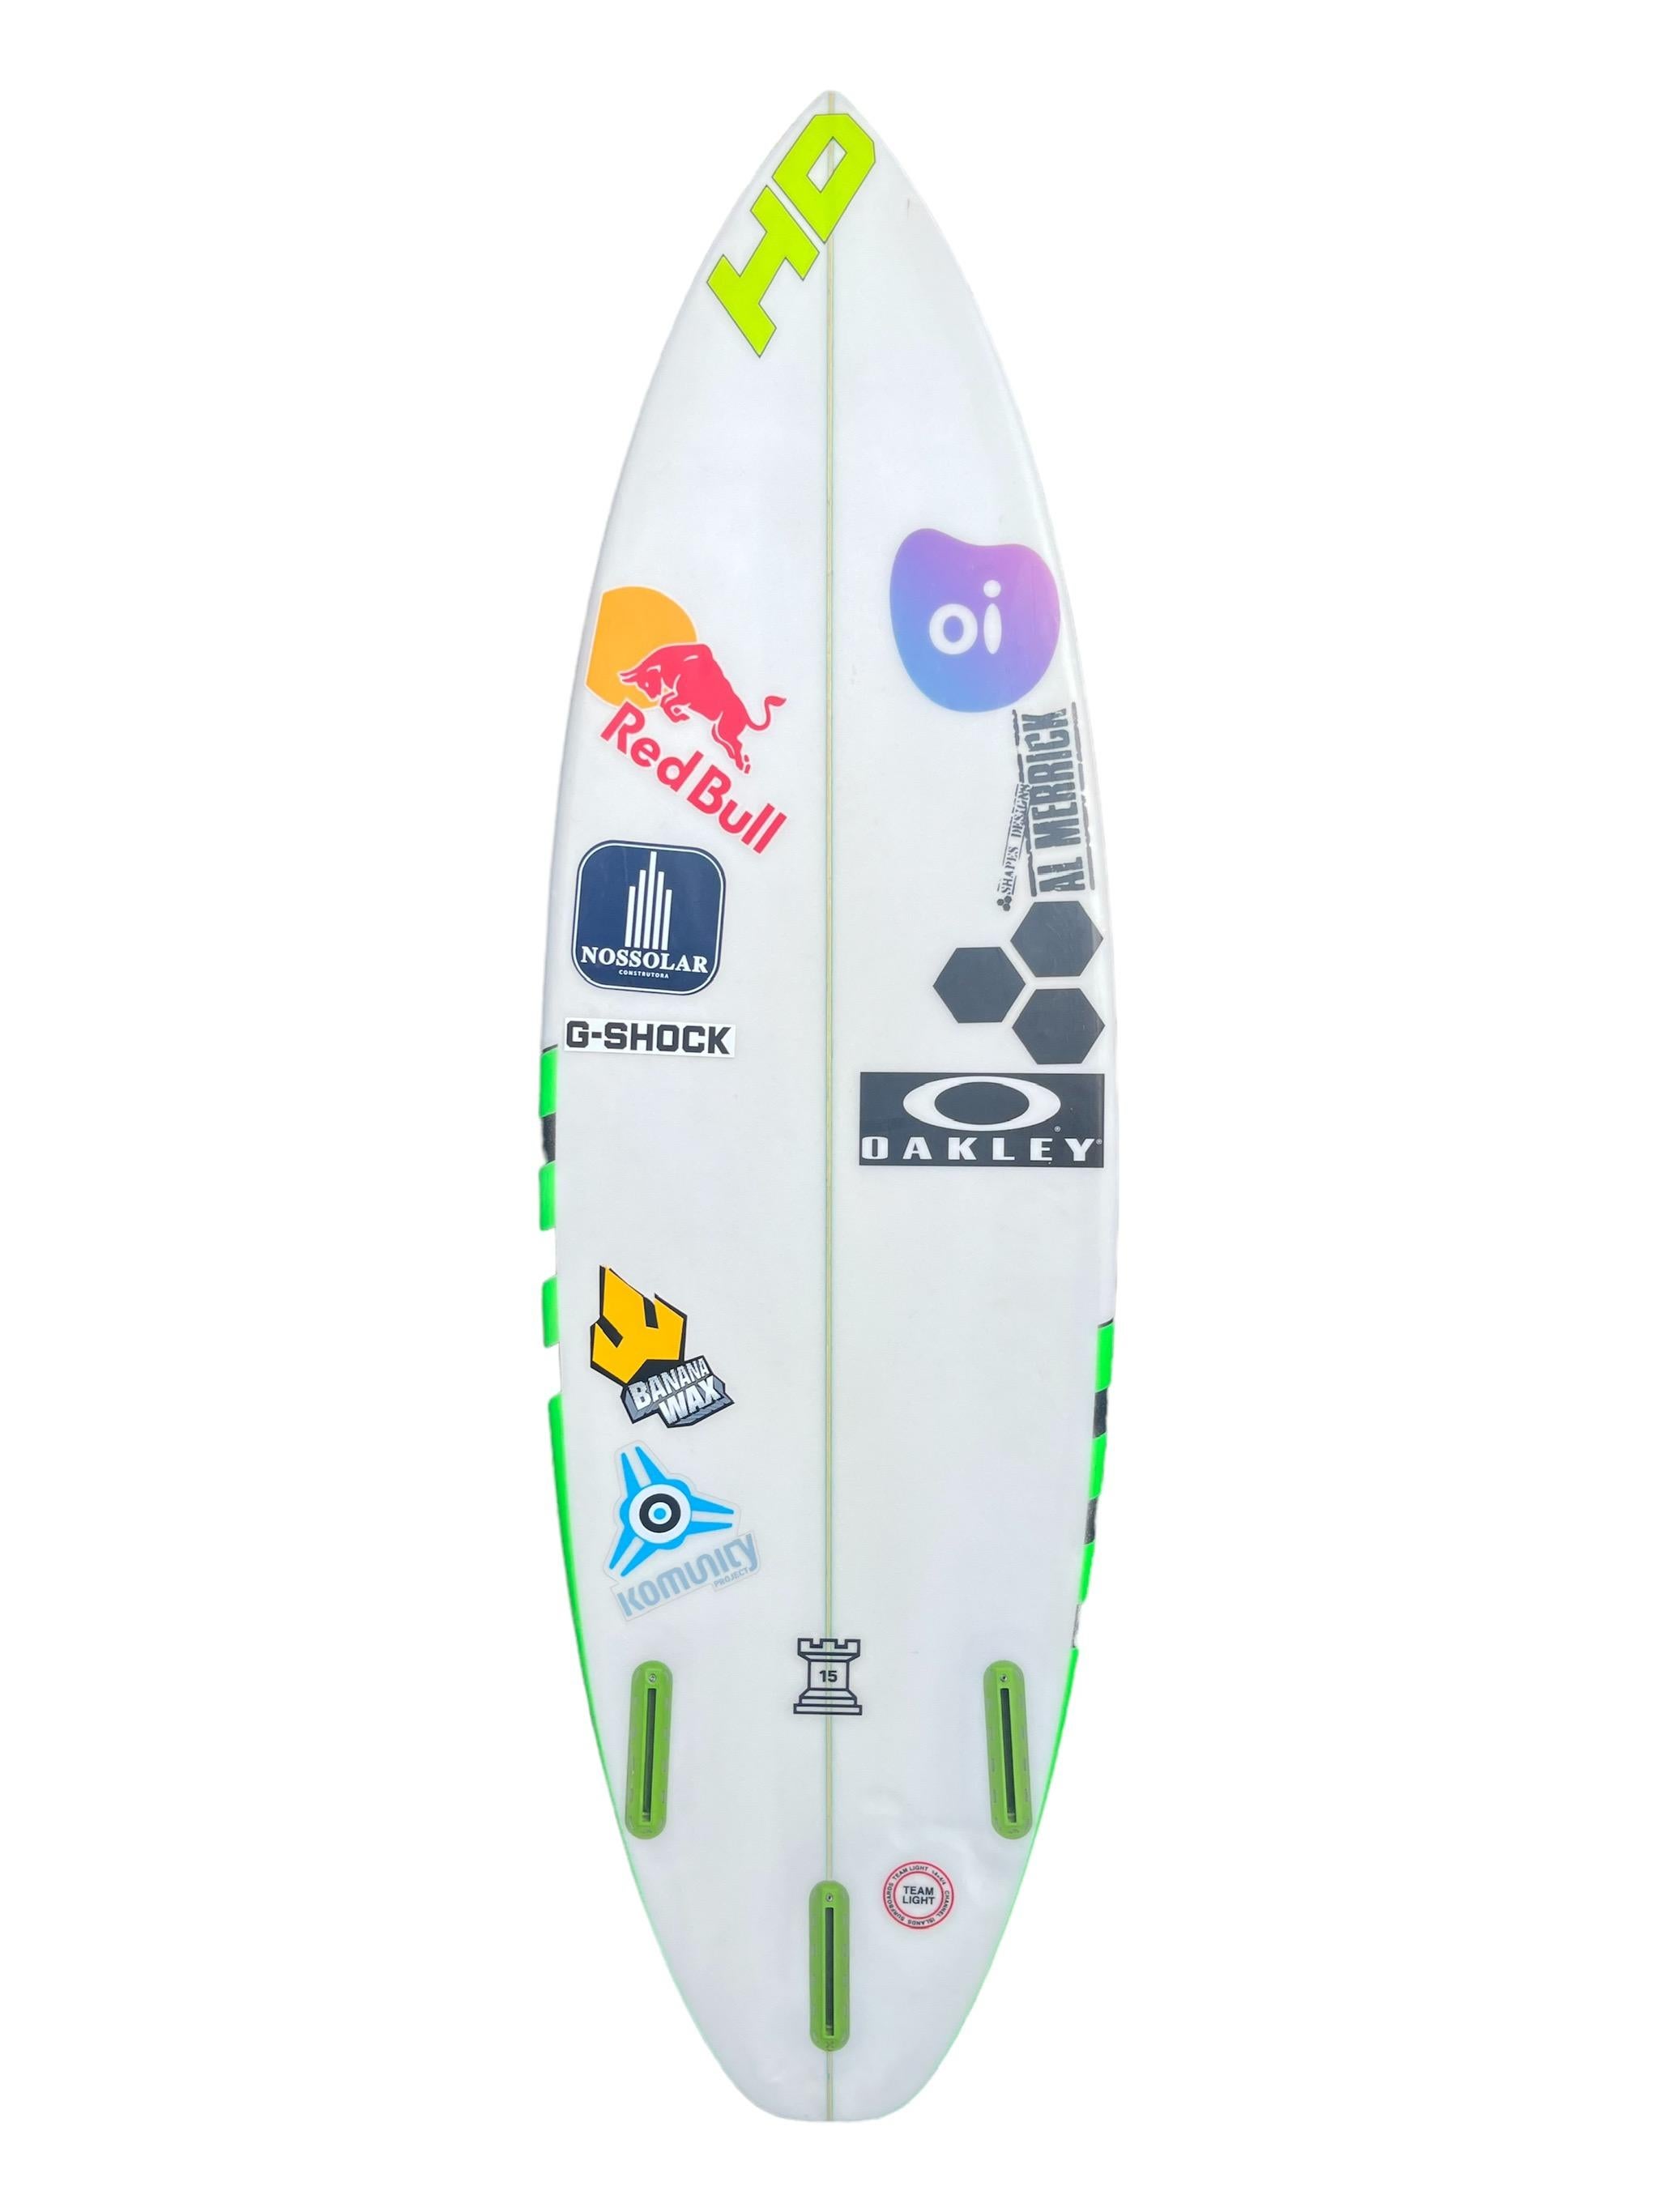 2015 World Champion of Surfing, Adriano De Souza’s personal surfboard. Neon green/jet-black airbrush design with thruster (tri-fin) setup. Shaped under the renowned Al Merrick’s Channel Islands Surfboards. Adriano De Souza is the 2015 WSL World